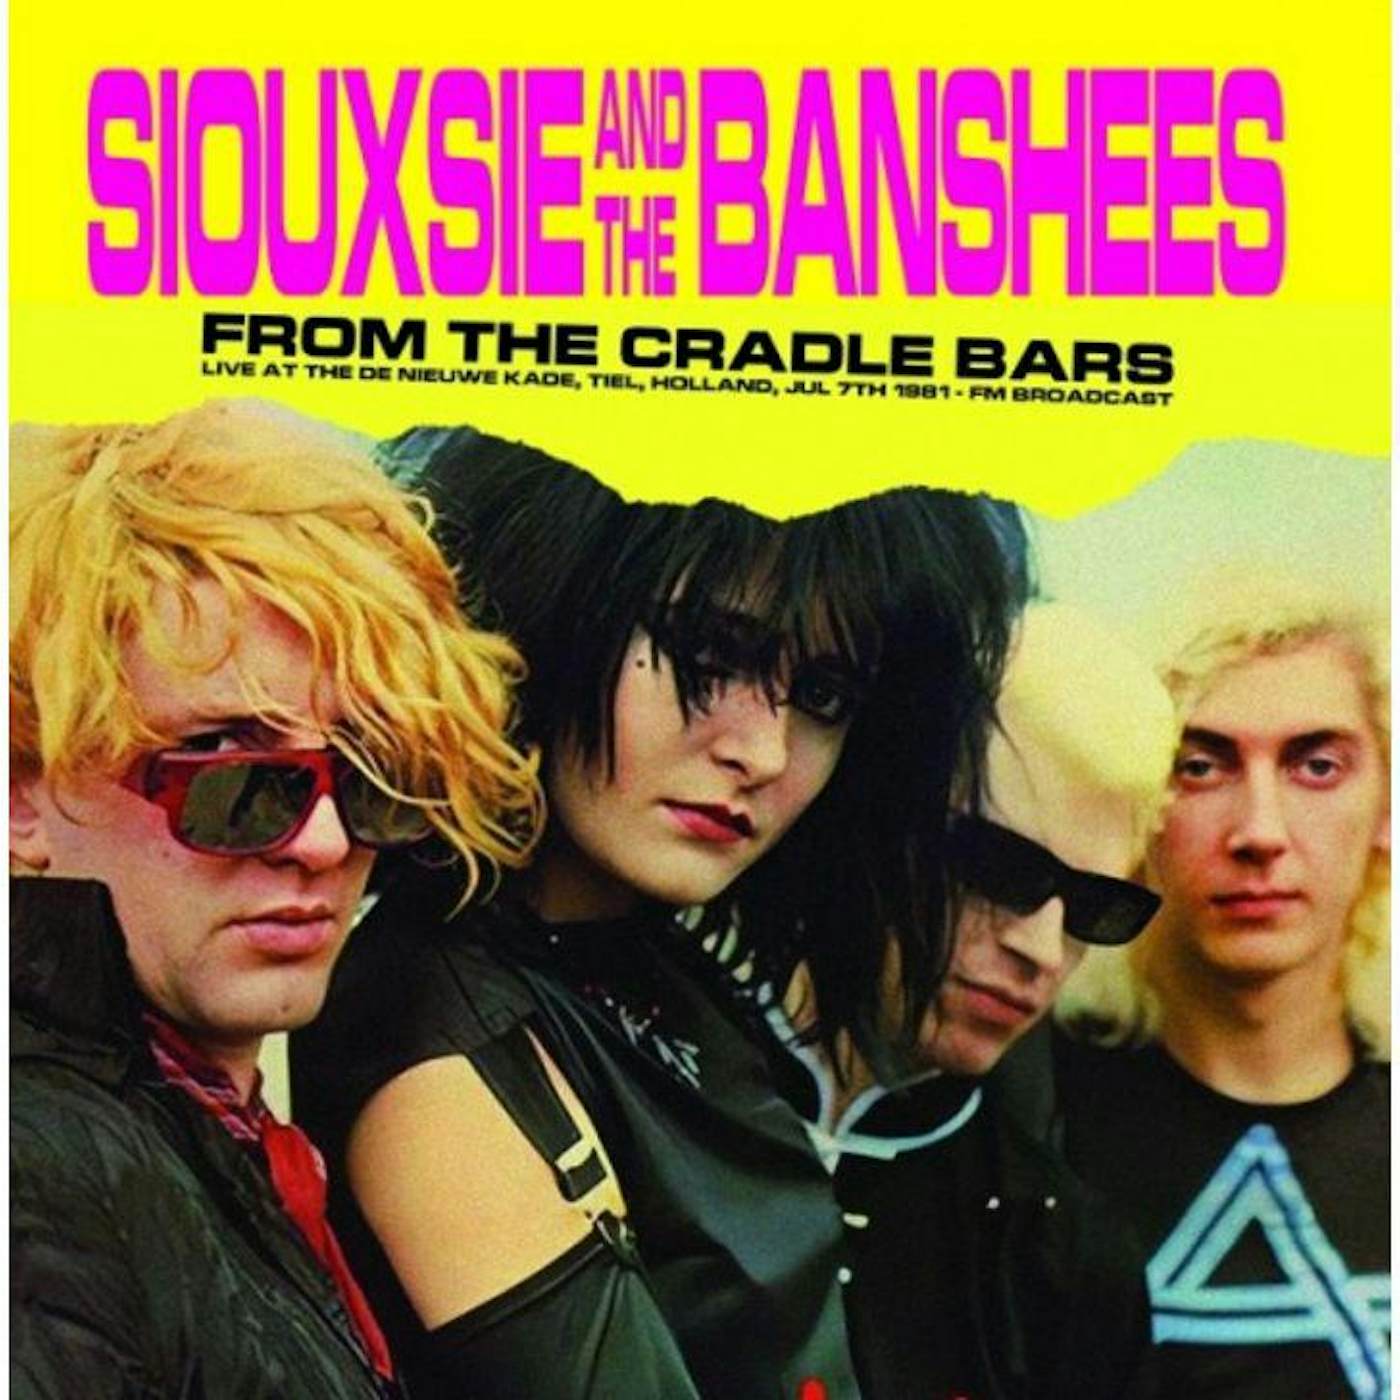 Siouxsie and the Banshees From The Cradle Bars: Live At The De Nieuwe Kade, Tiel, Holland, Jul 7th 1981 (Yellow) Vinyl Record